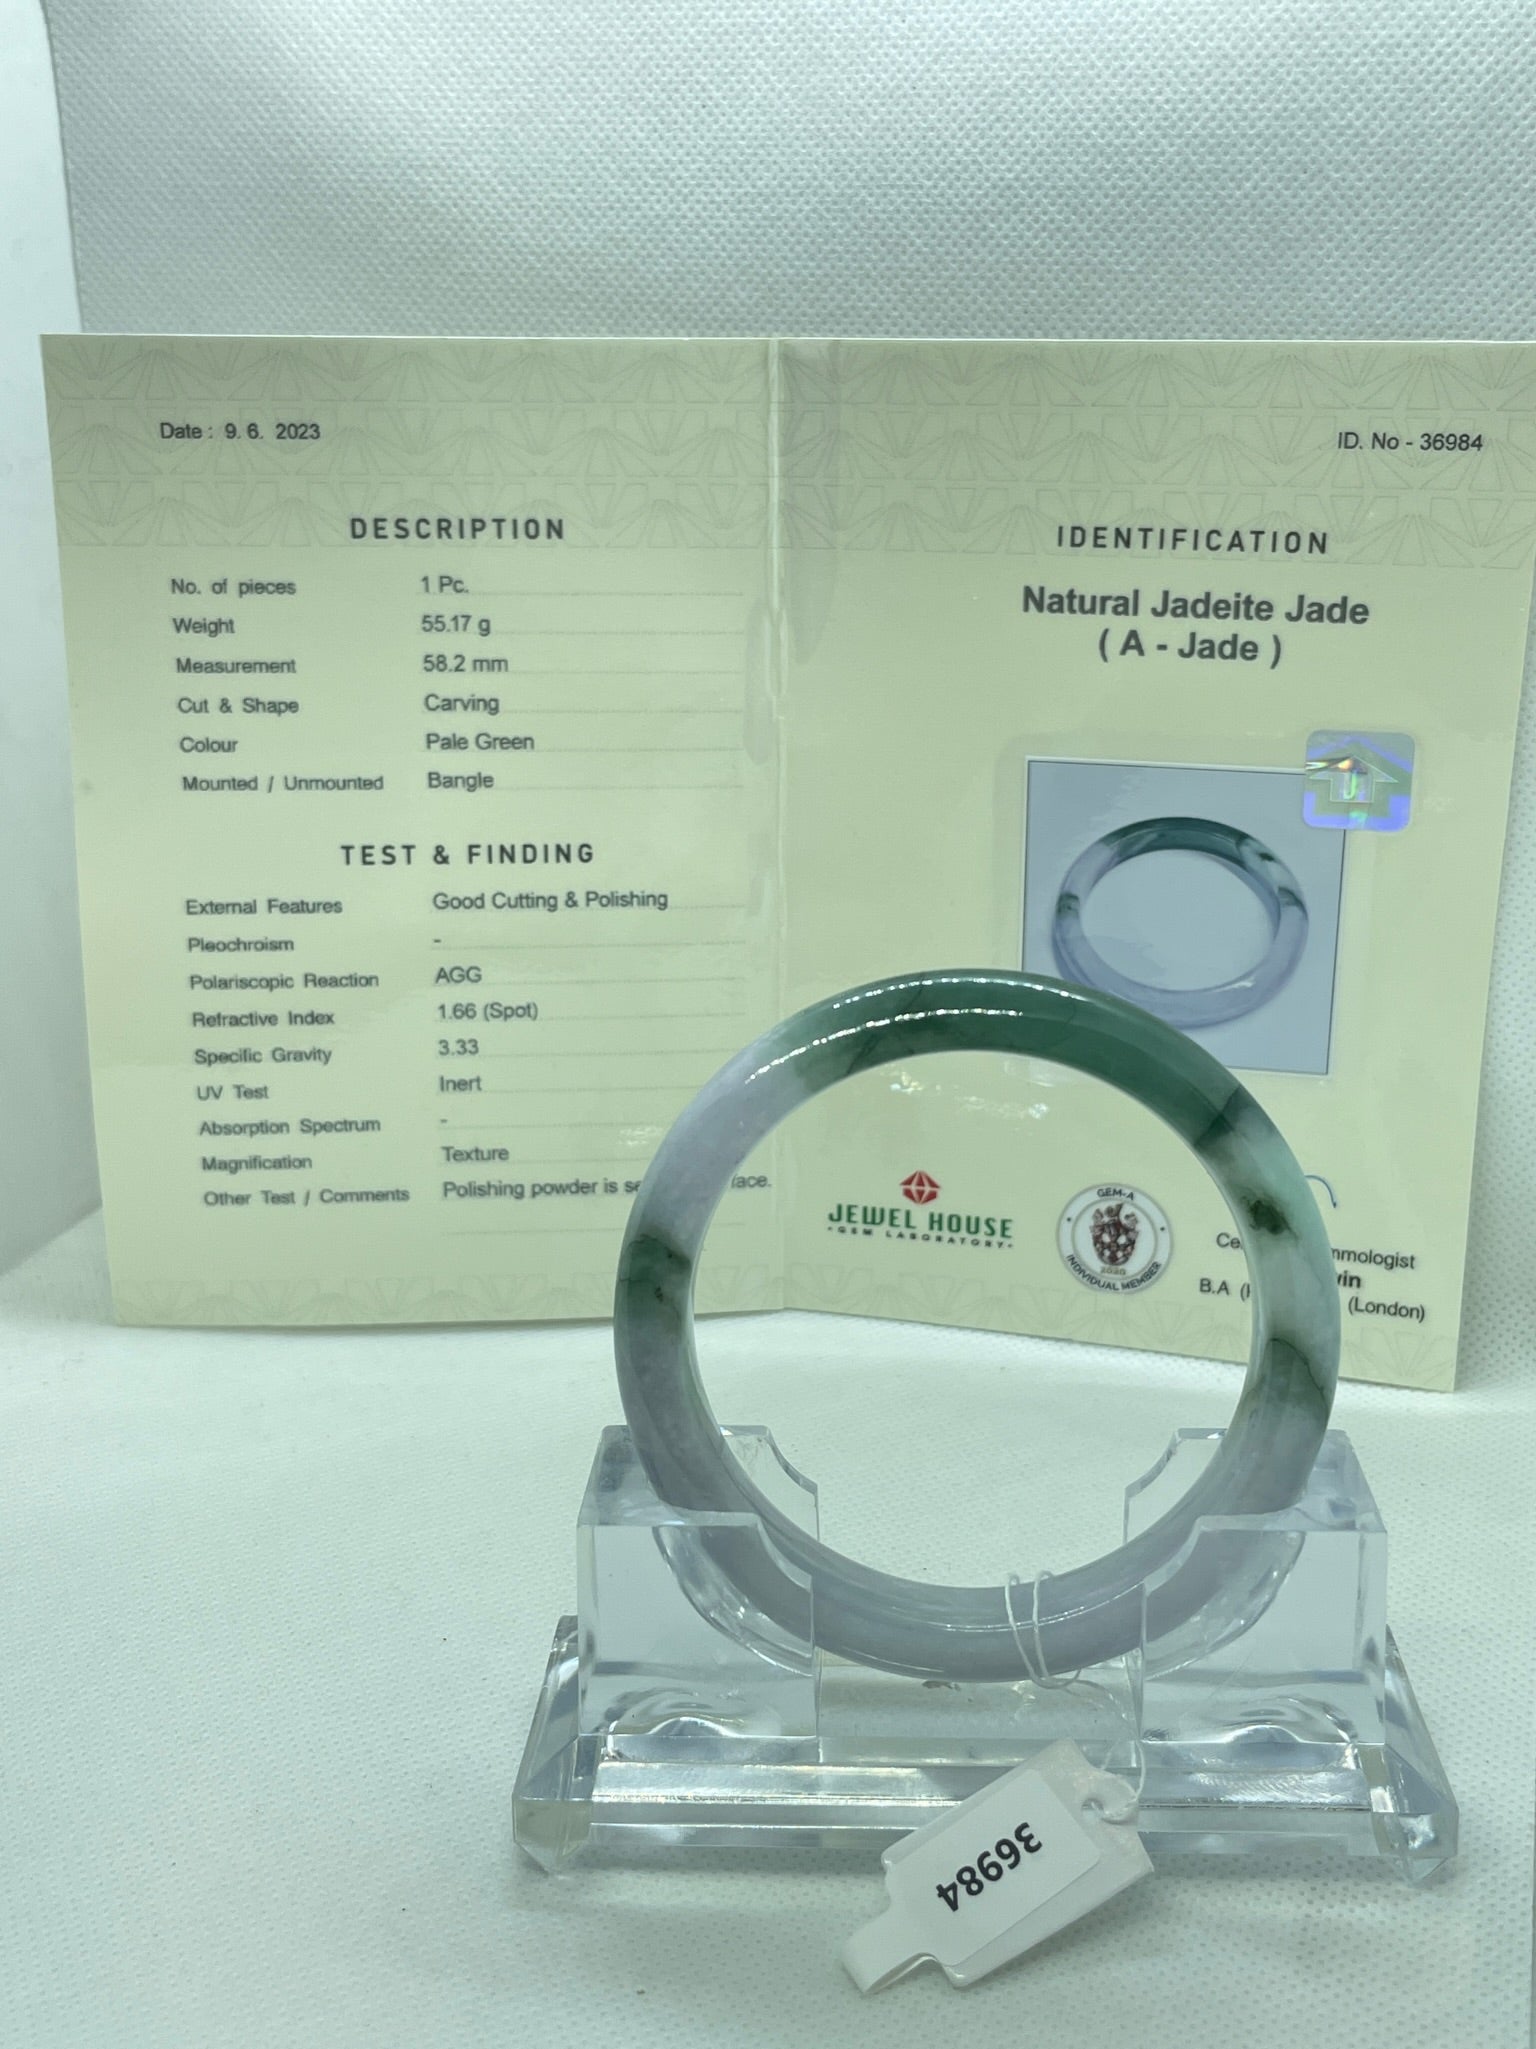 Grade A Natural Jade Bangle with certificate #36984